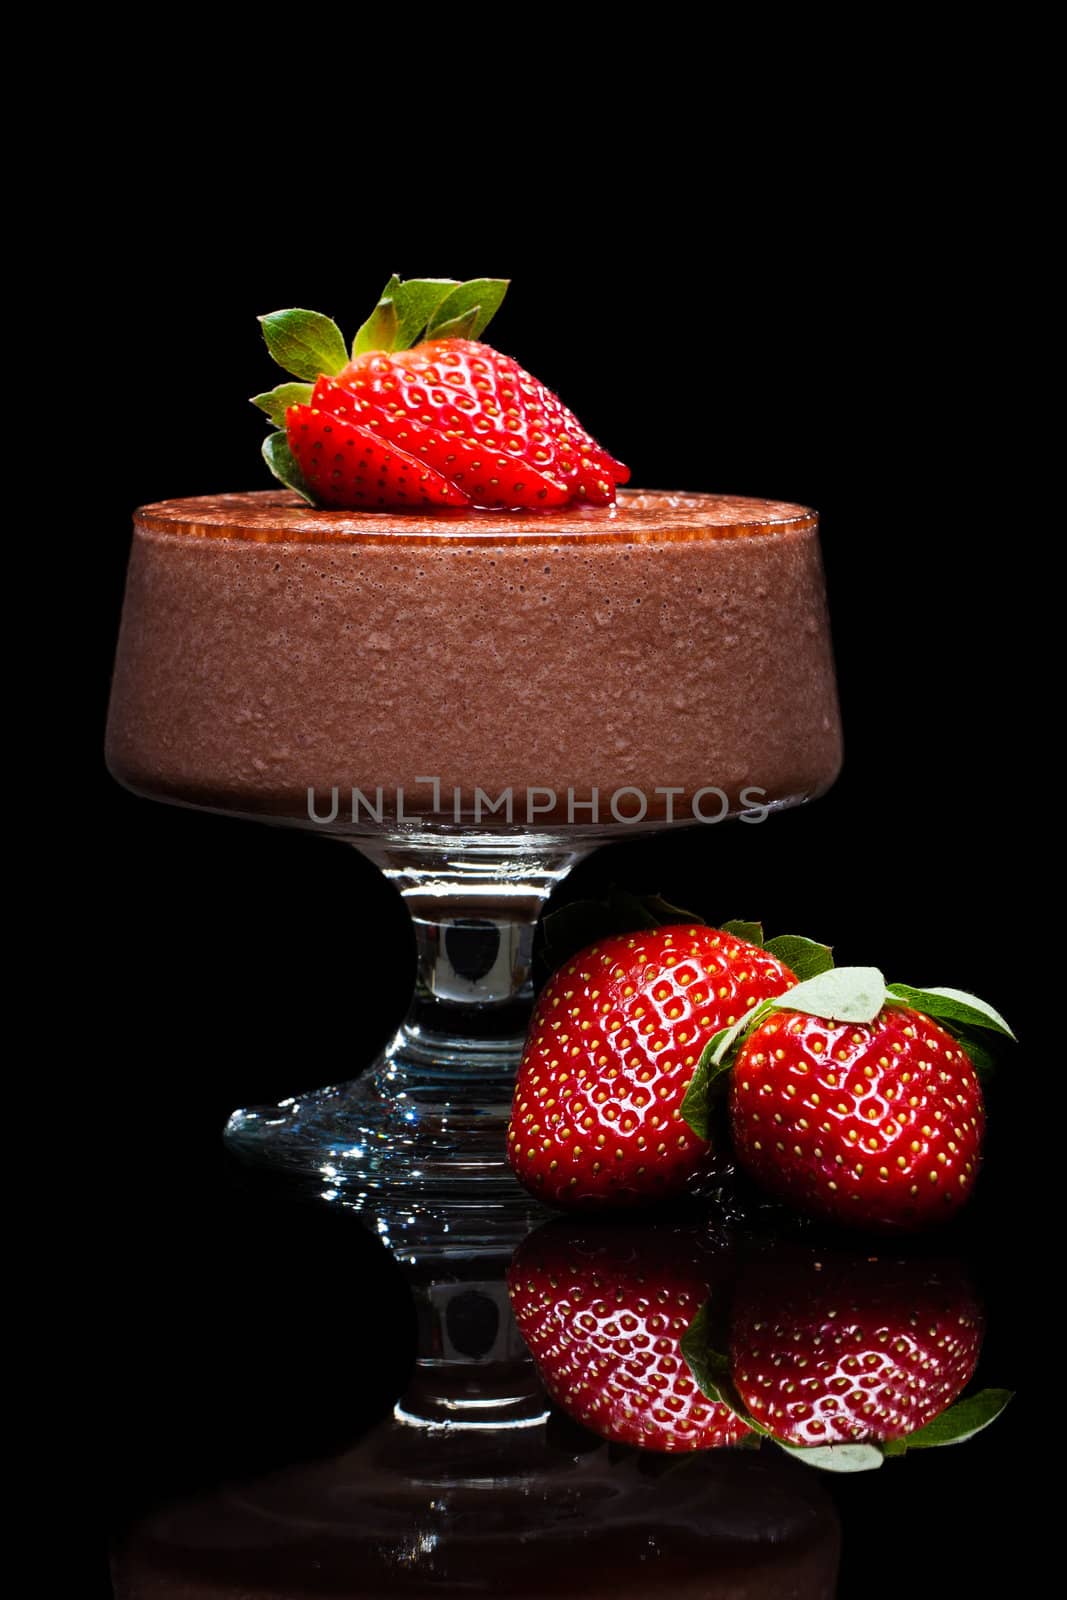 Chocolate mousse dessert with delicious red strawberries. Isolated on black.